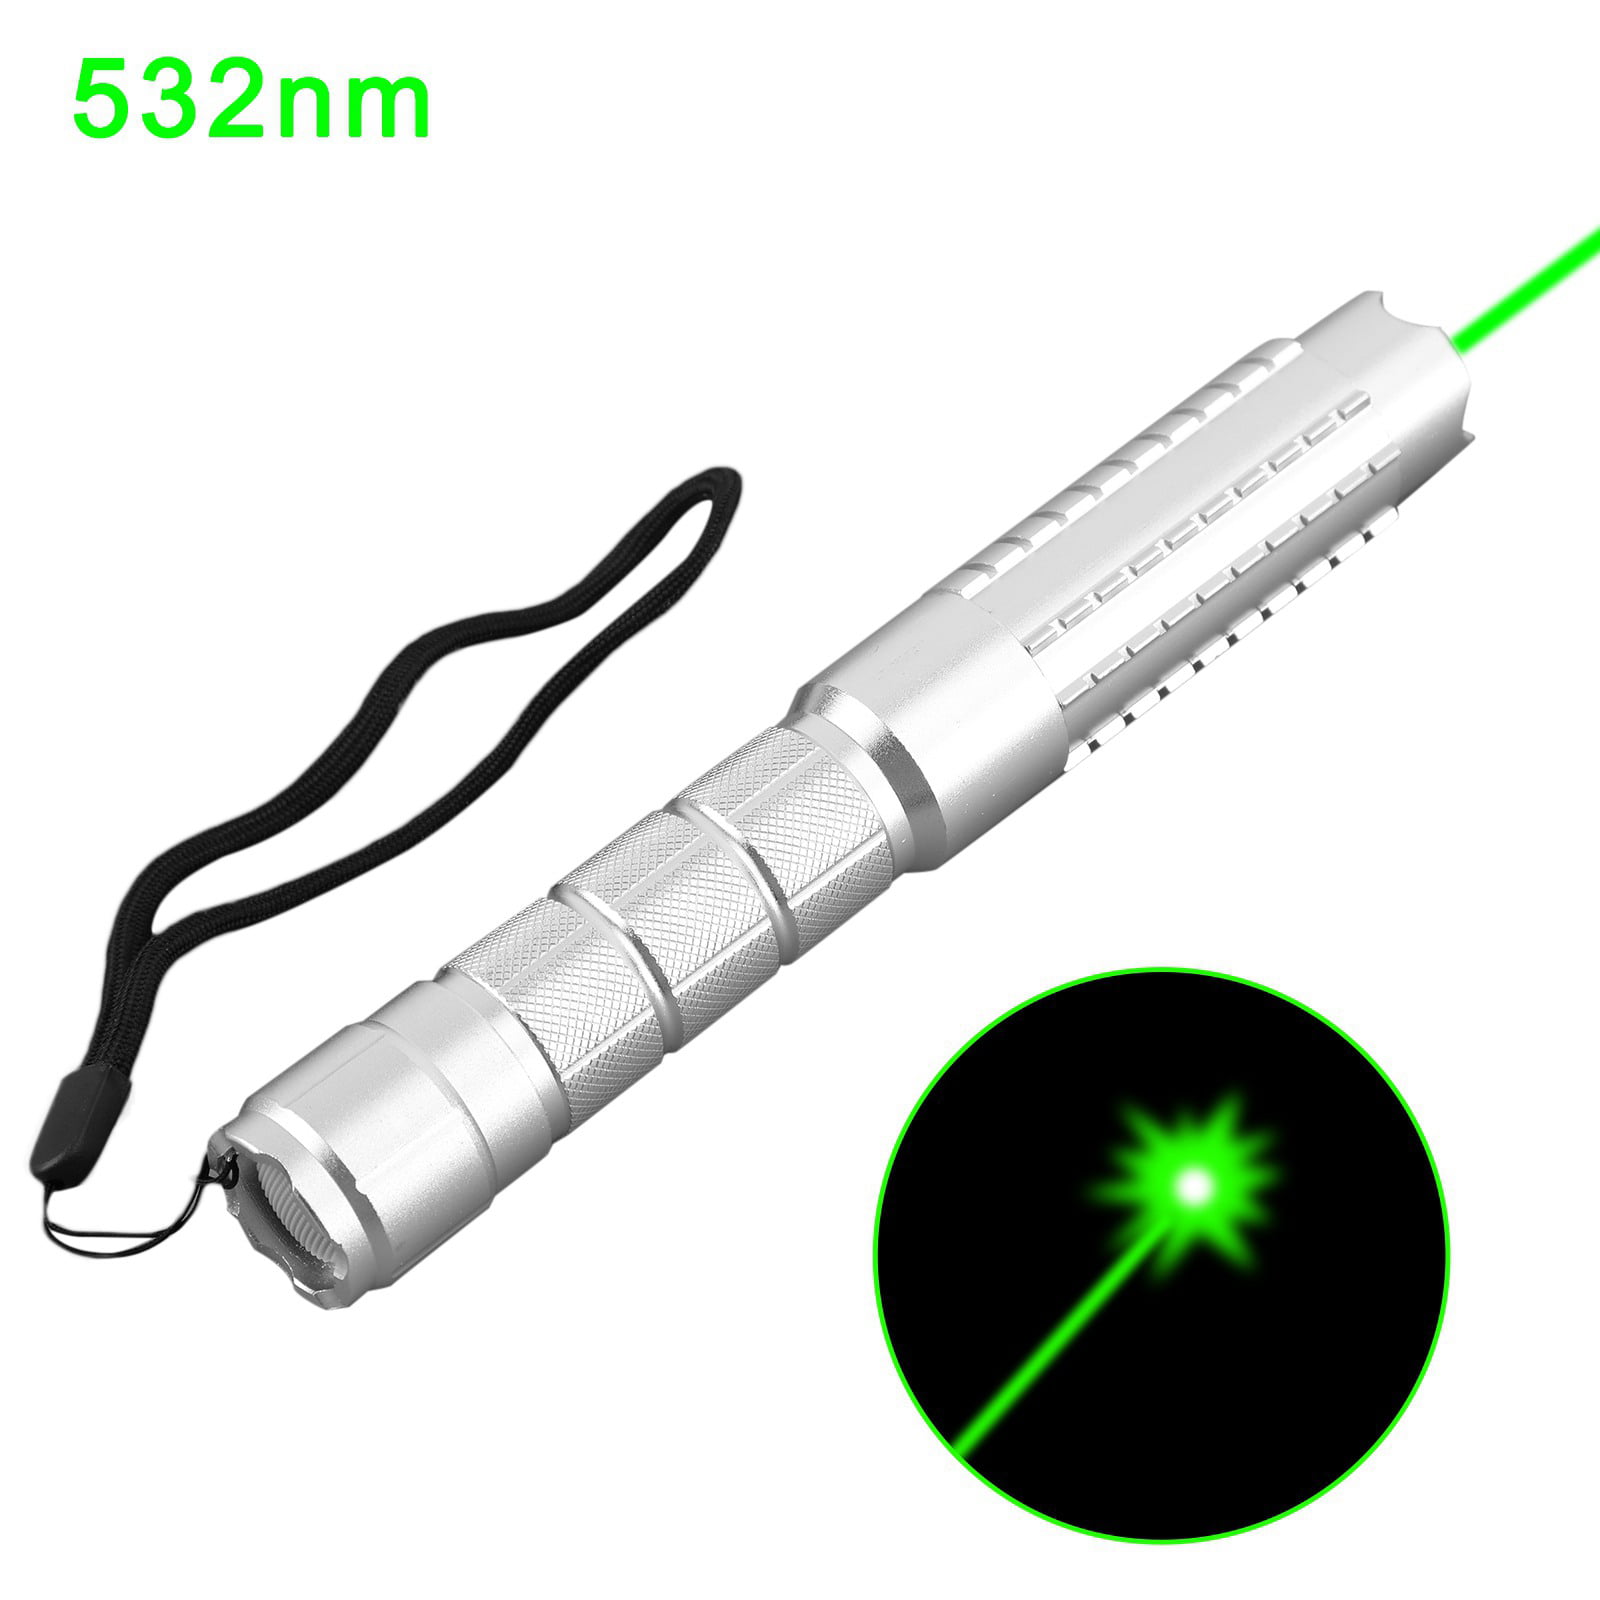 Details about   Beam High-Powered Laser Pointer Pen 532nm Red Visible  1MW  Light Military 1pcs 